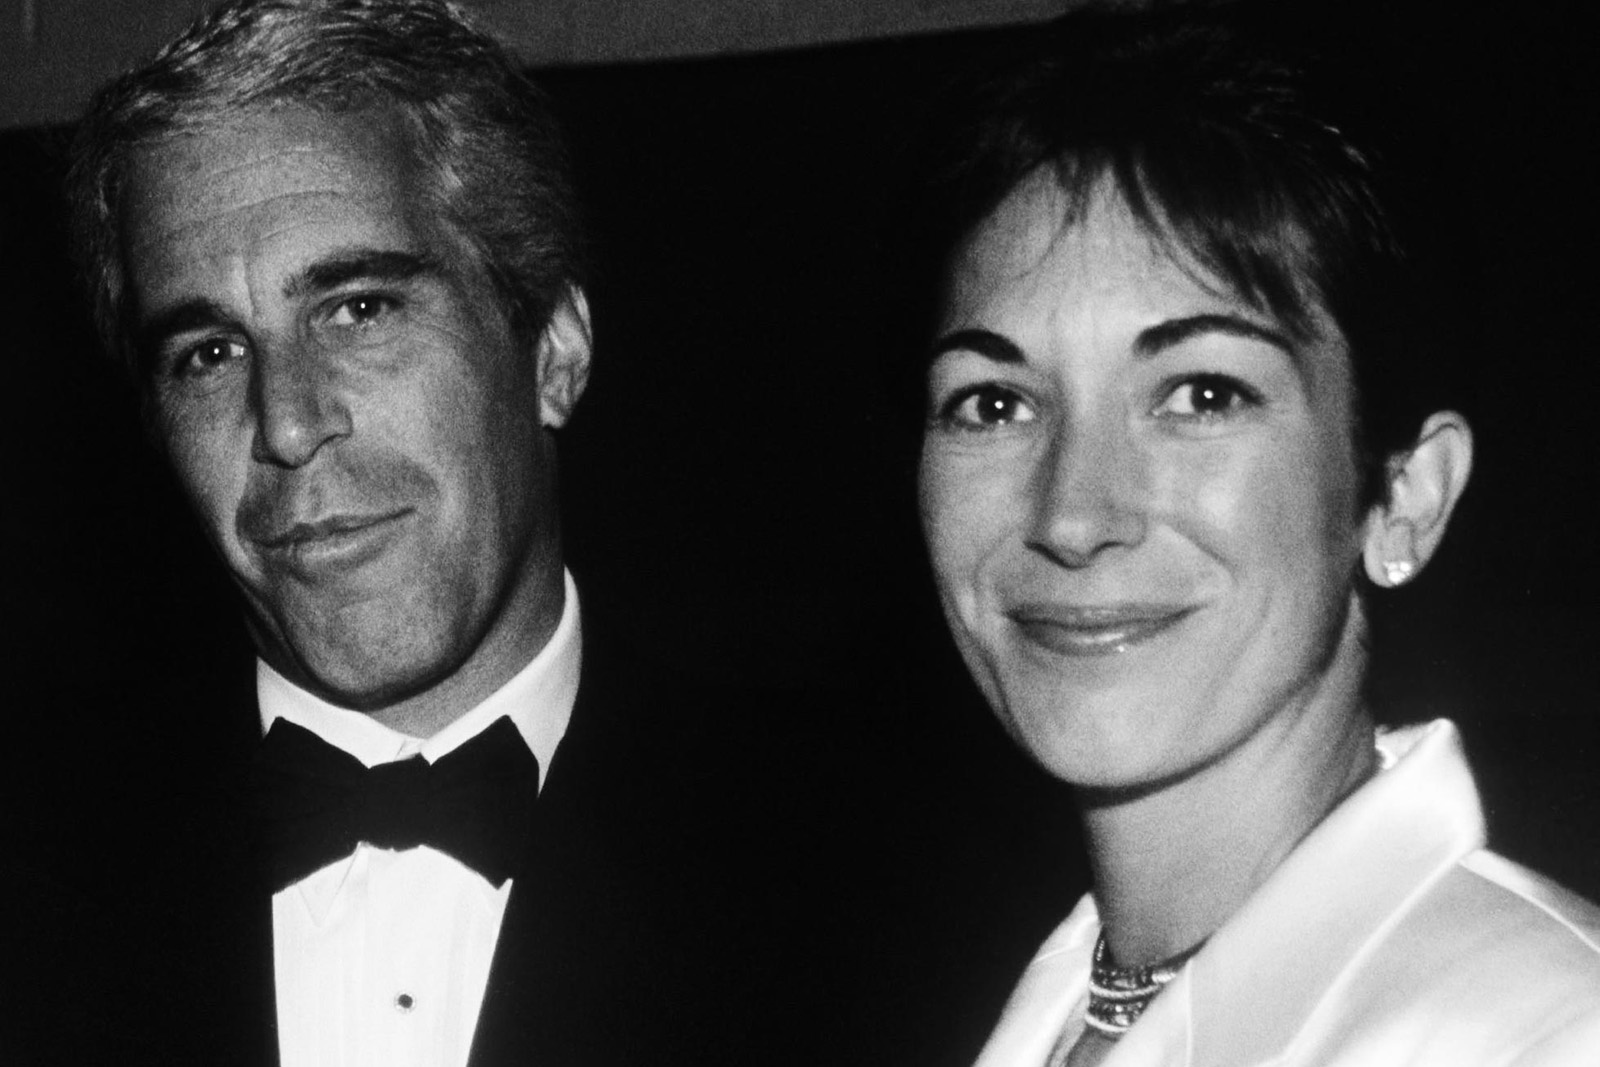 As more documents come out from Ghislaine Maxwell's 2015 lawsuit, it was revealed Maxwell denied knowing about Jeffrey Epstein and his illegal activities.